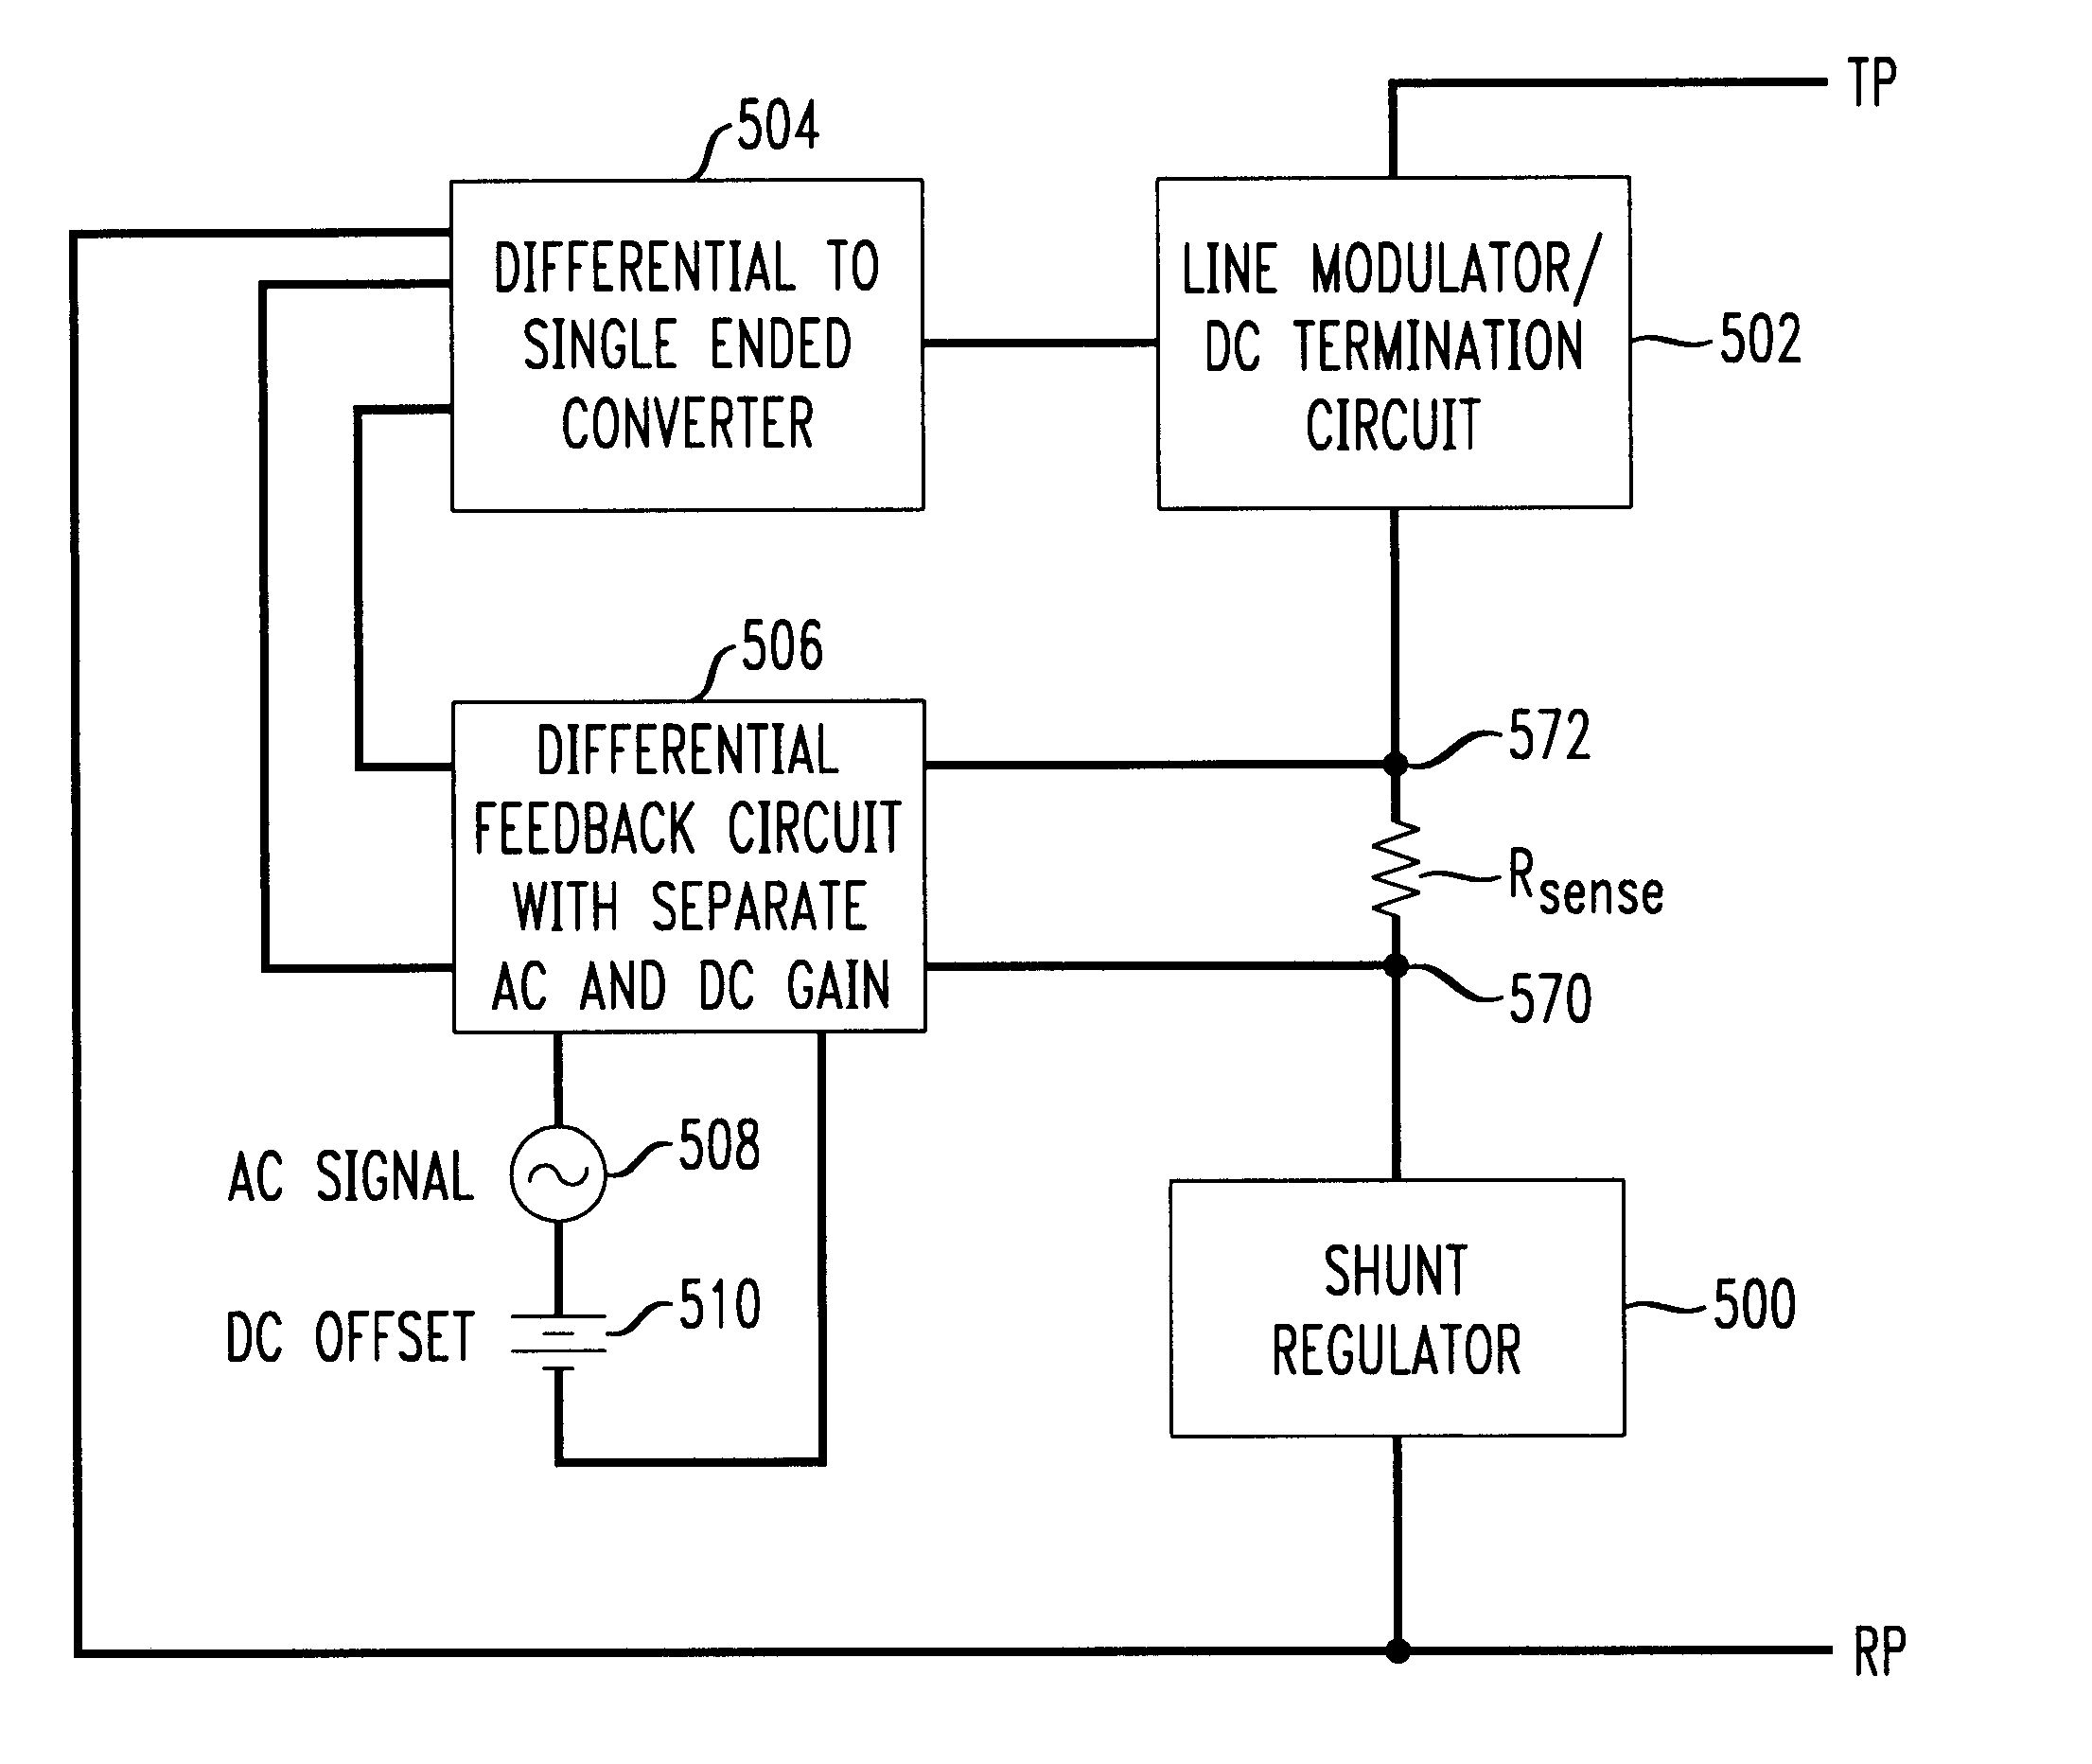 Low noise line powered DAA with differential feedback